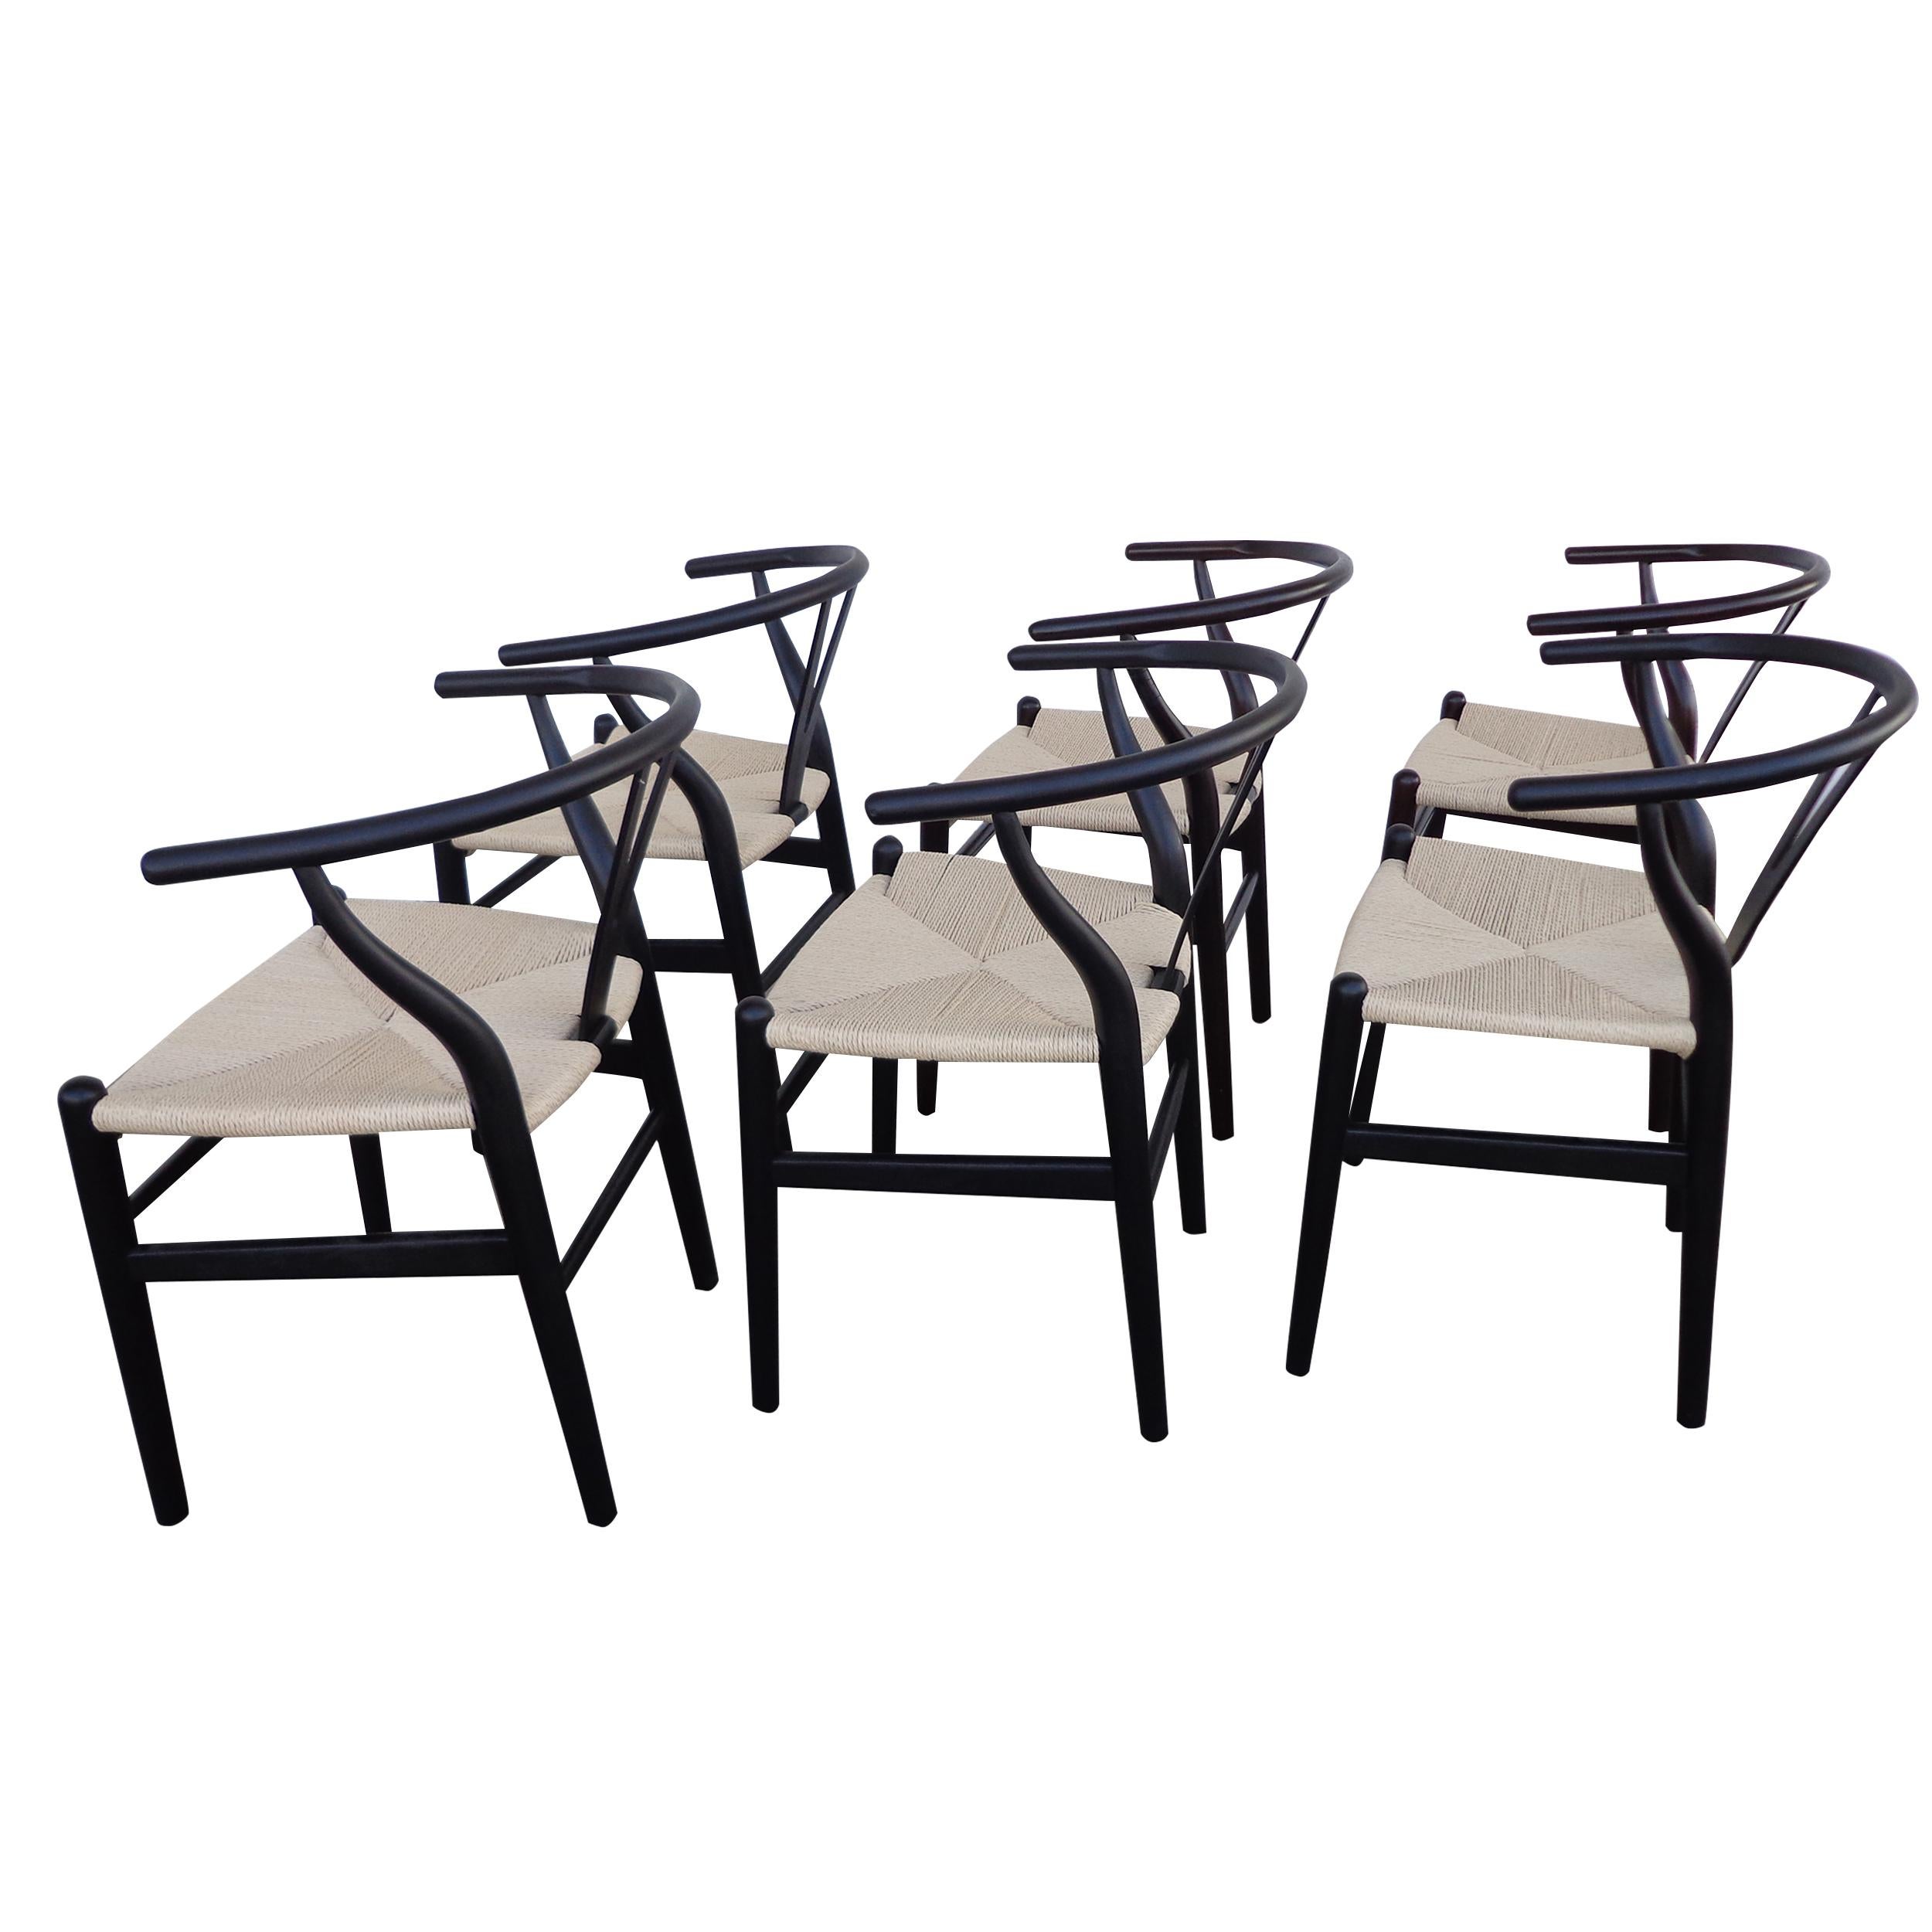 Set of 6 Wishbone style dining chairs 

This set of stylish wishbone chairs are lacquered in black with a woven seat in natural cord.

Measures: 18